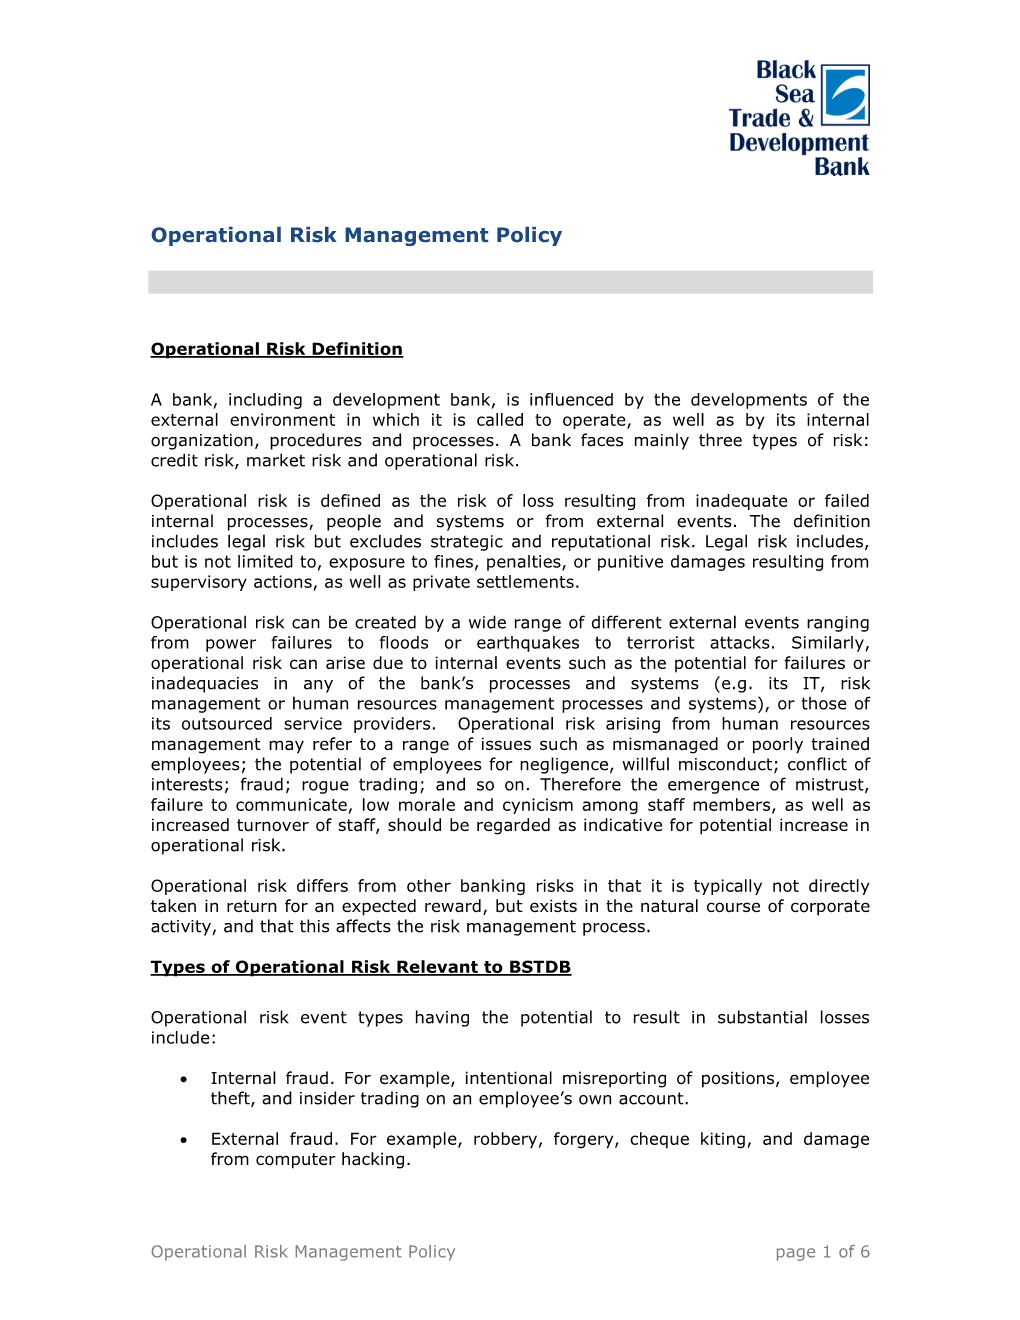 Operational Risk Management Policy